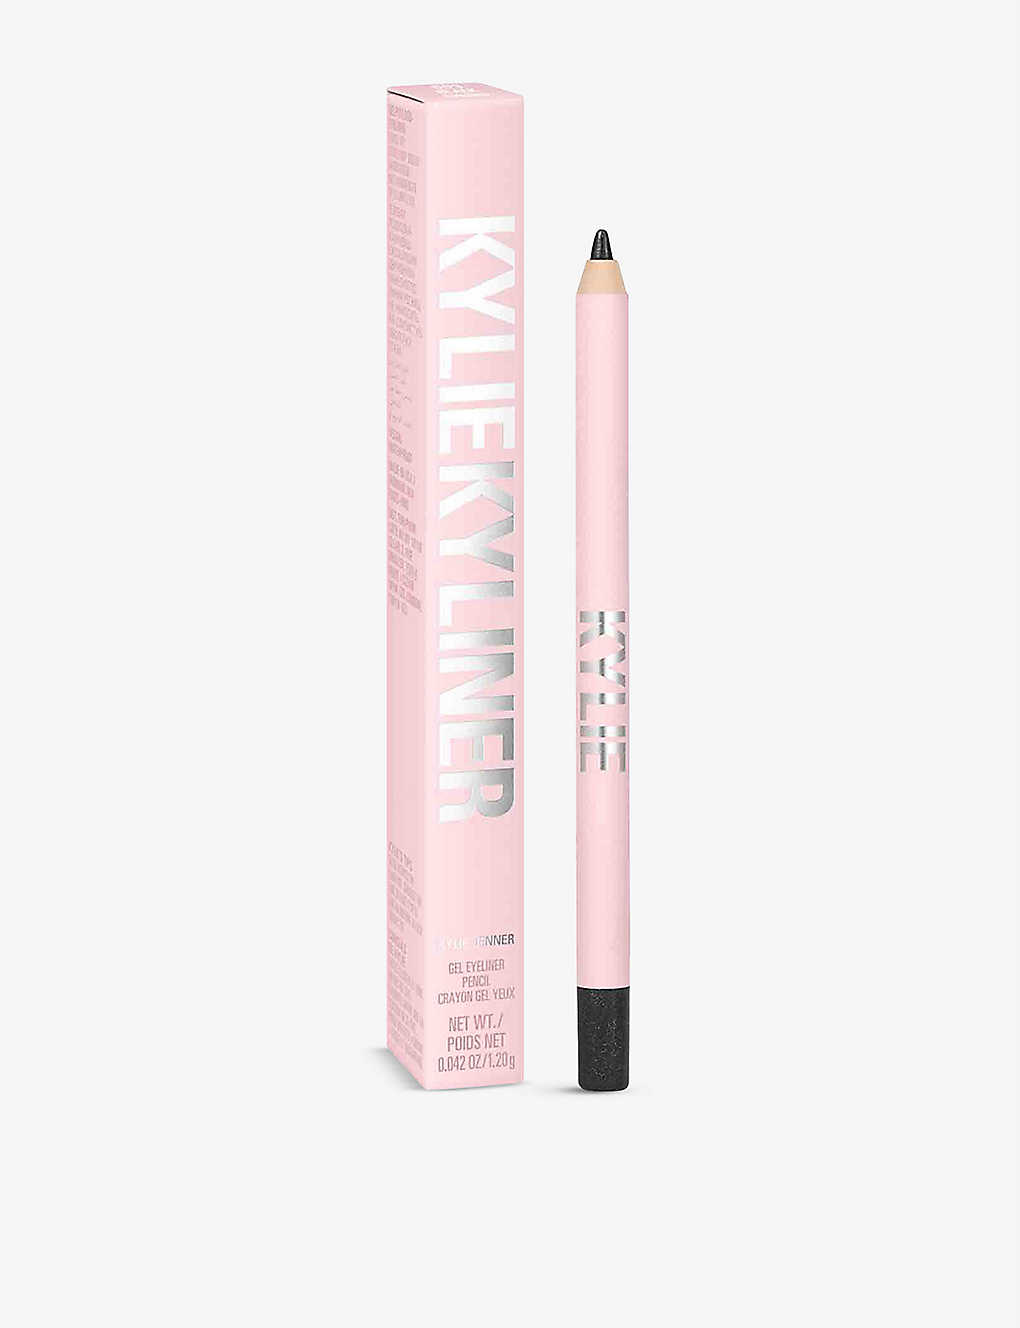 Kylie By Kylie Jenner Kyliner Gel Pencil 4.25g In 009 Shimmery Black